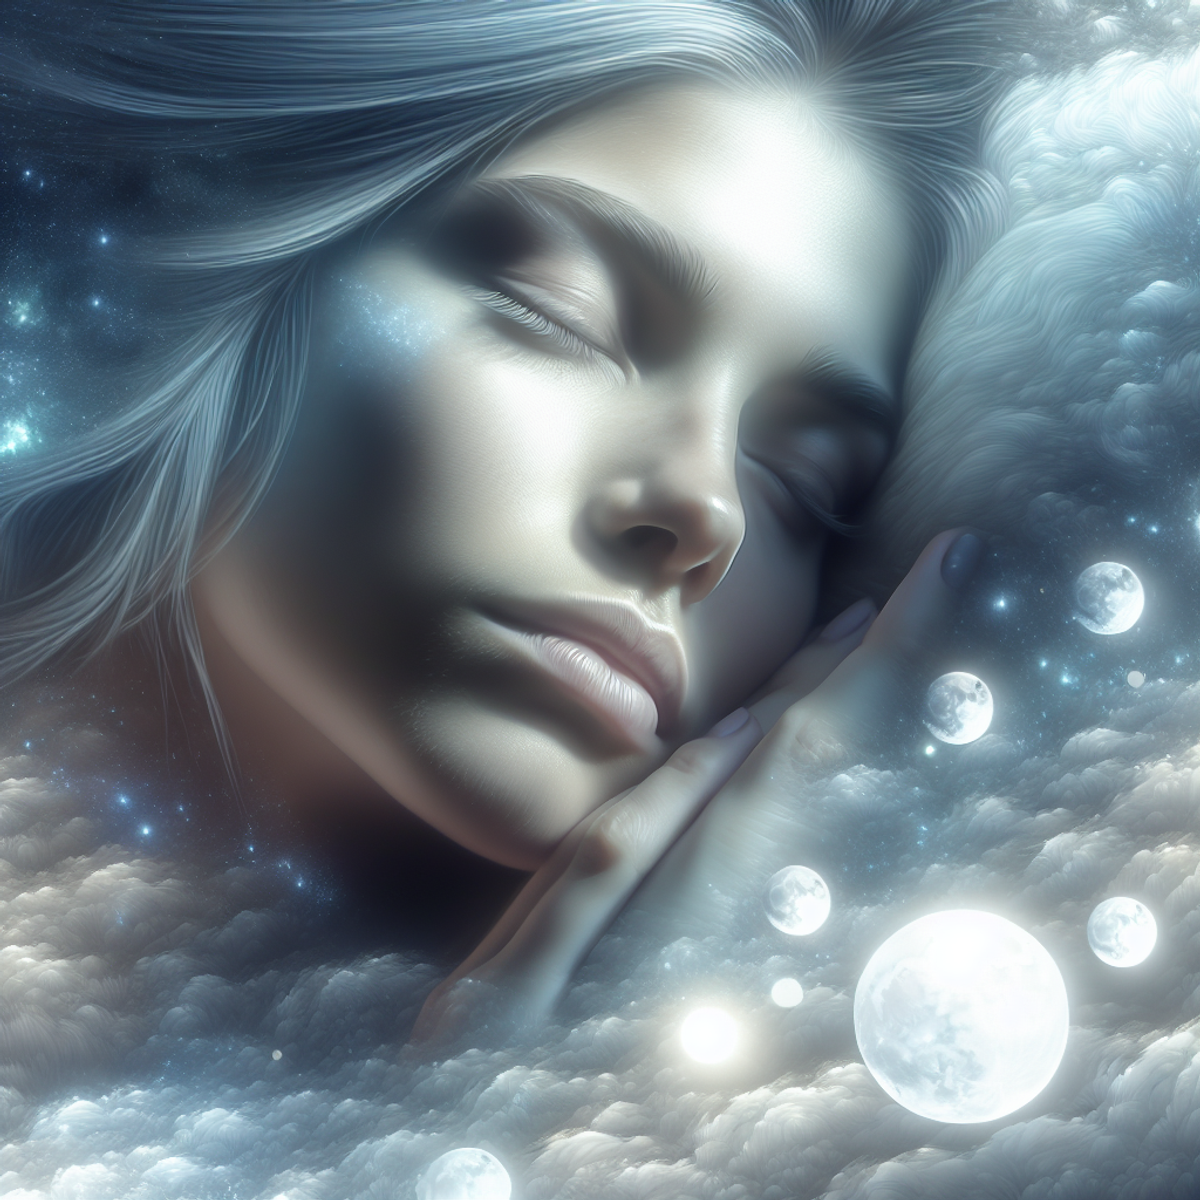 A serene and detailed artwork of a Caucasian female peacefully sleeping, with the moonlight casting a low, cool light on her face, highlighting her every detail with a gentle touch.